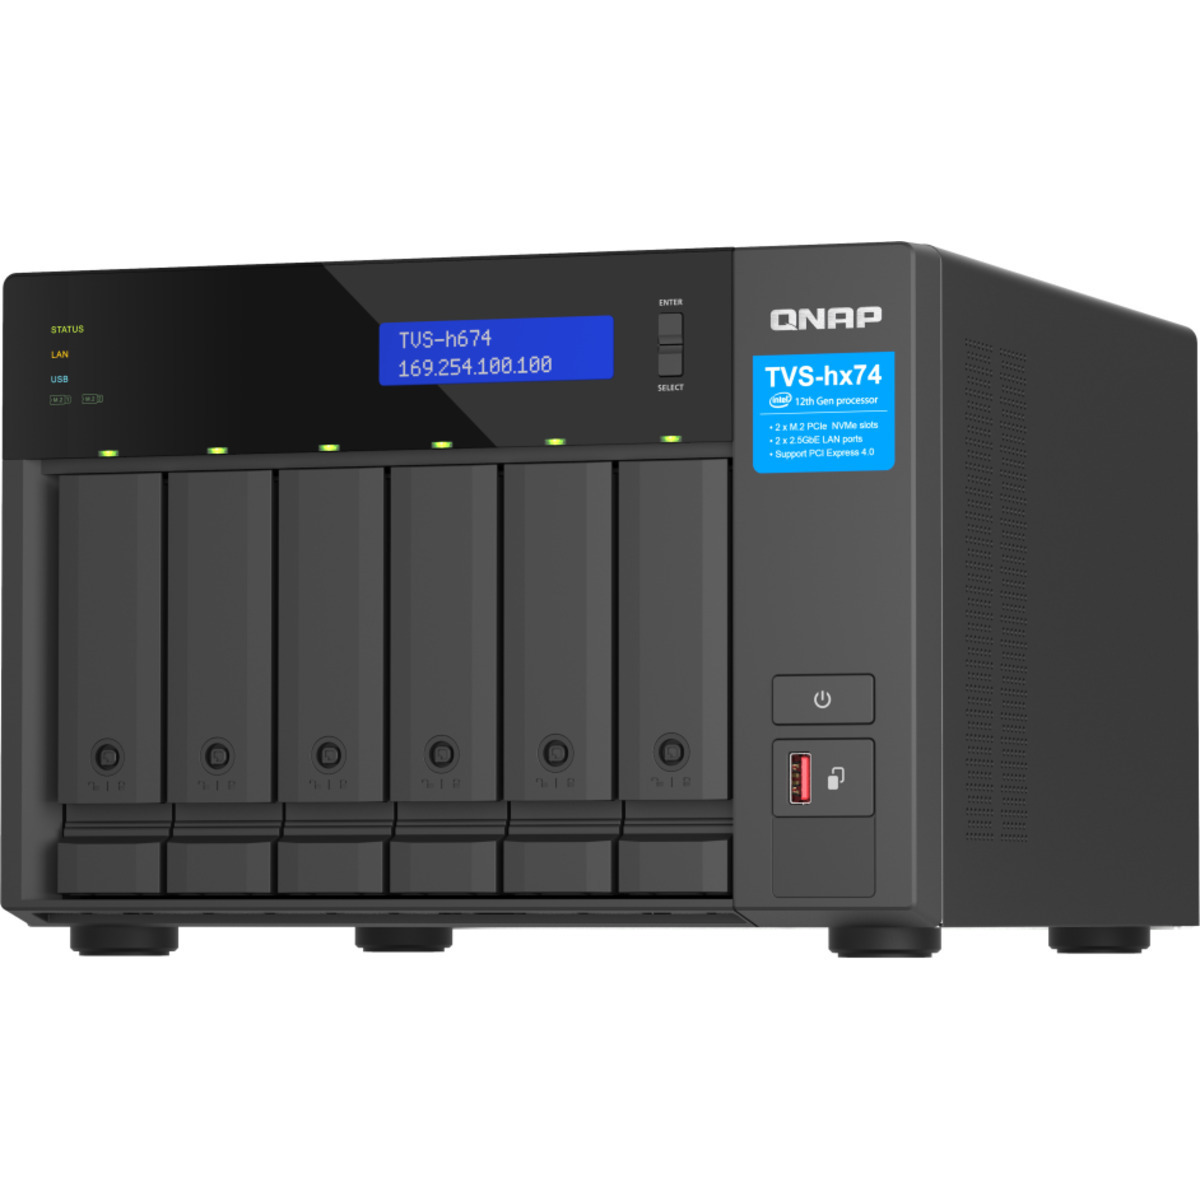 buy QNAP TVS-h674 Core i5 24tb Desktop NAS - Network Attached Storage Device 6x4000gb Seagate BarraCuda ST4000DM004 3.5 7200rpm SATA 6Gb/s HDD CONSUMER Class Drives Installed - Burn-In Tested - nas headquarters buy network attached storage server device das new raid-5 free shipping simply usa TVS-h674 Core i5